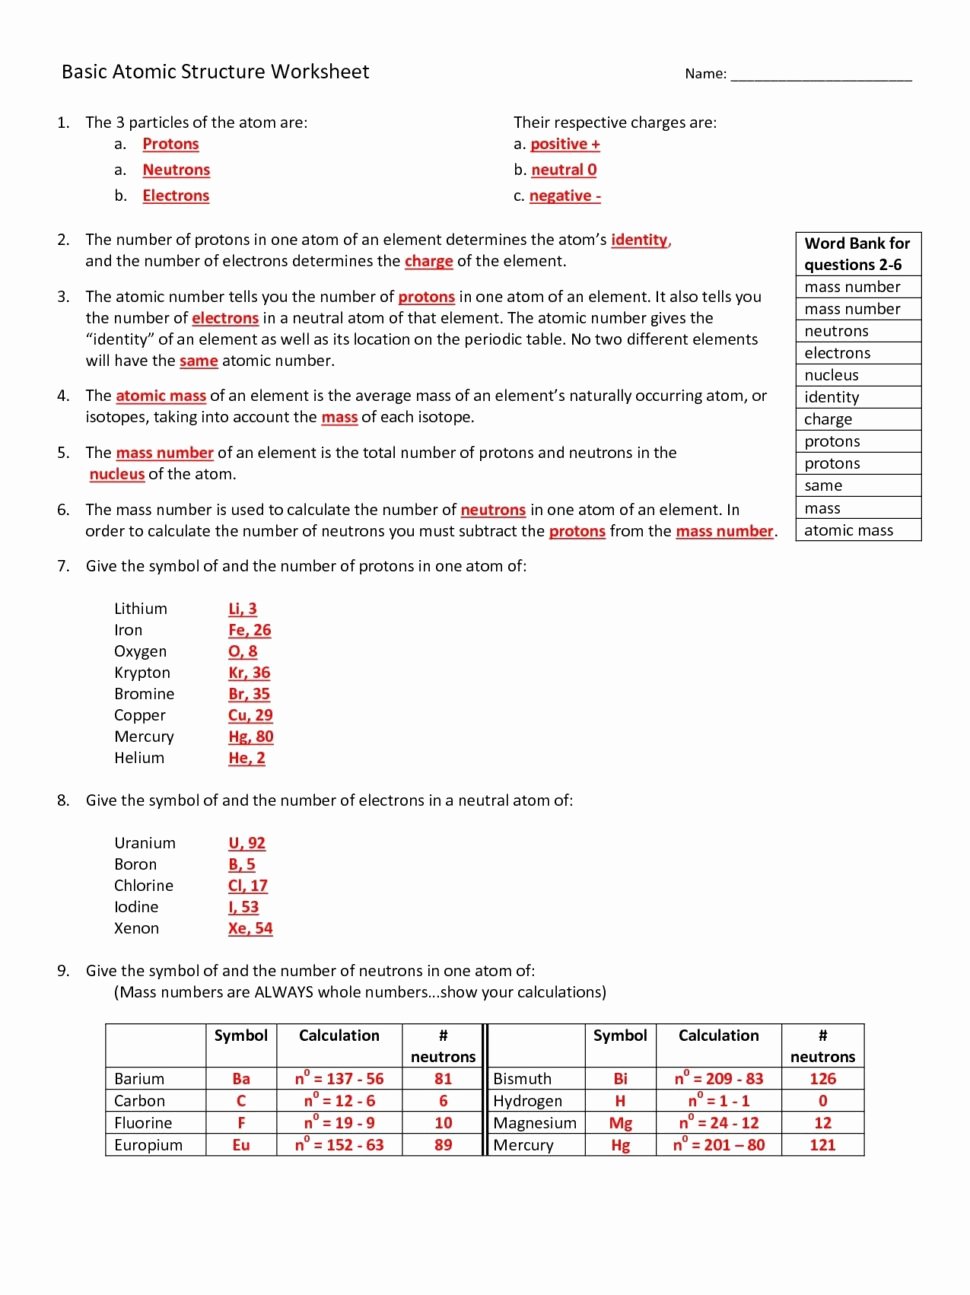 Atomic Structure Worksheet Answers Key Awesome Basic atomic Structure Worksheet Answer Key Chart